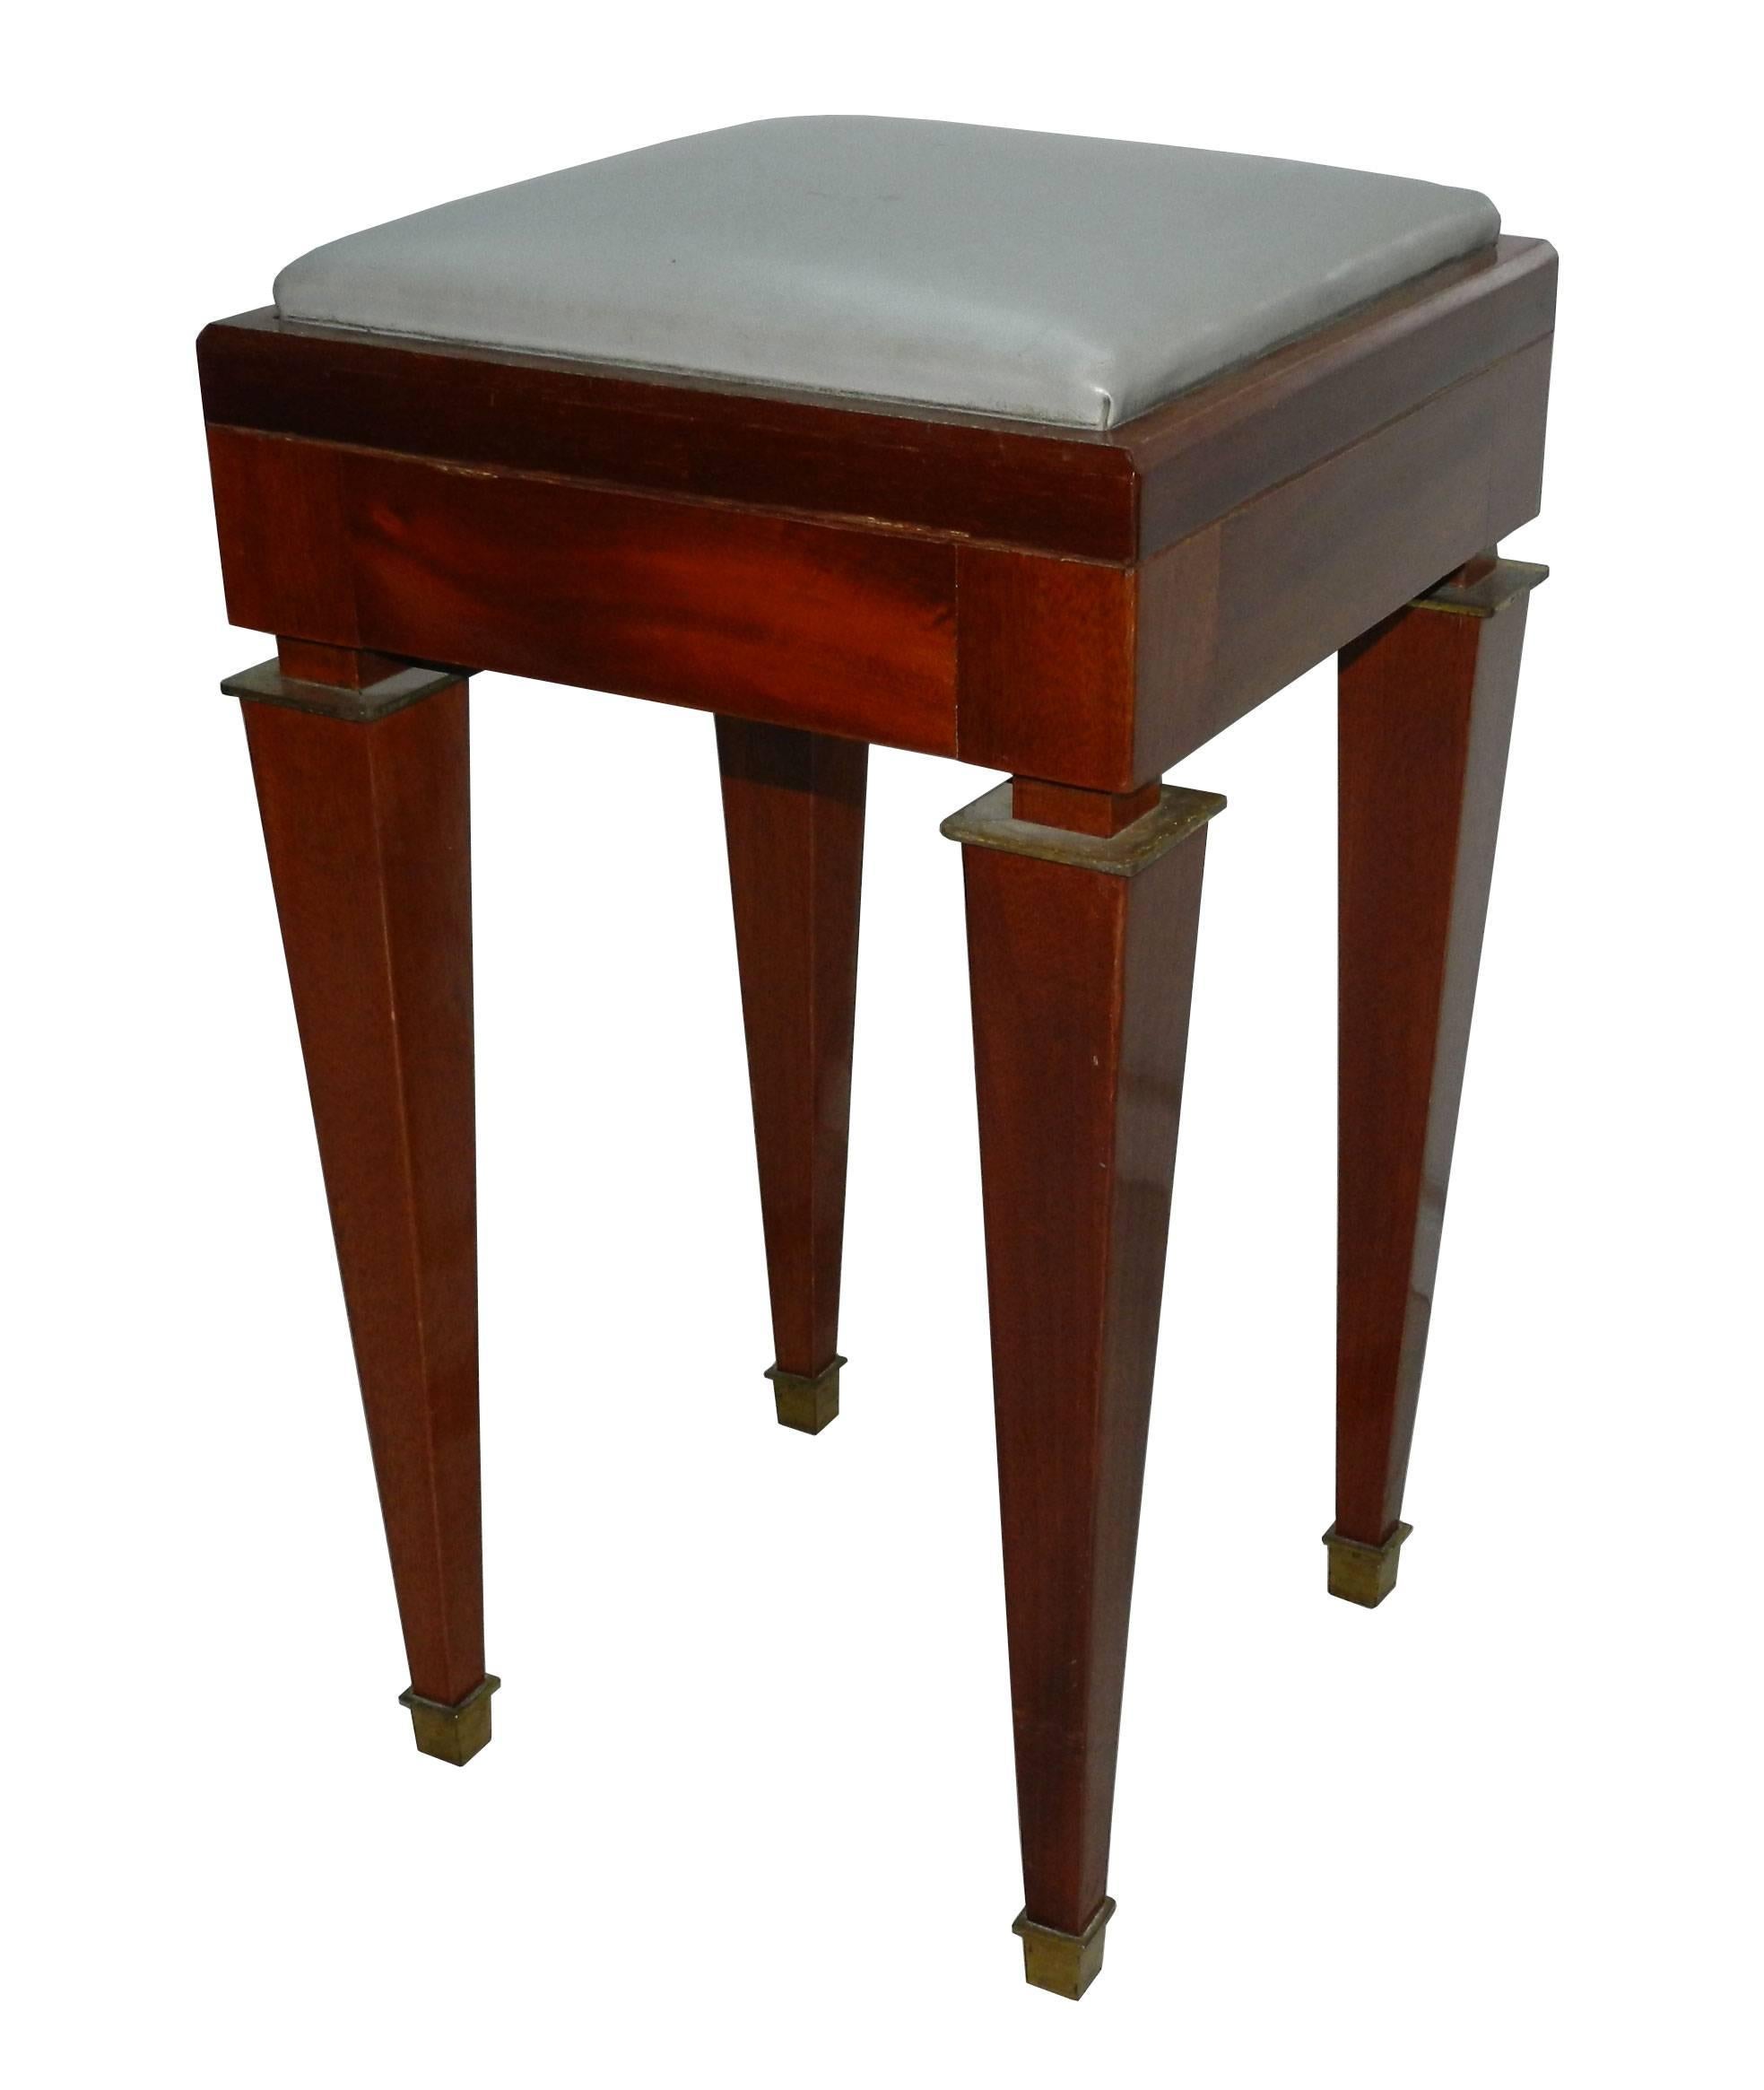 Unsual stools in mahogany with brass feet 